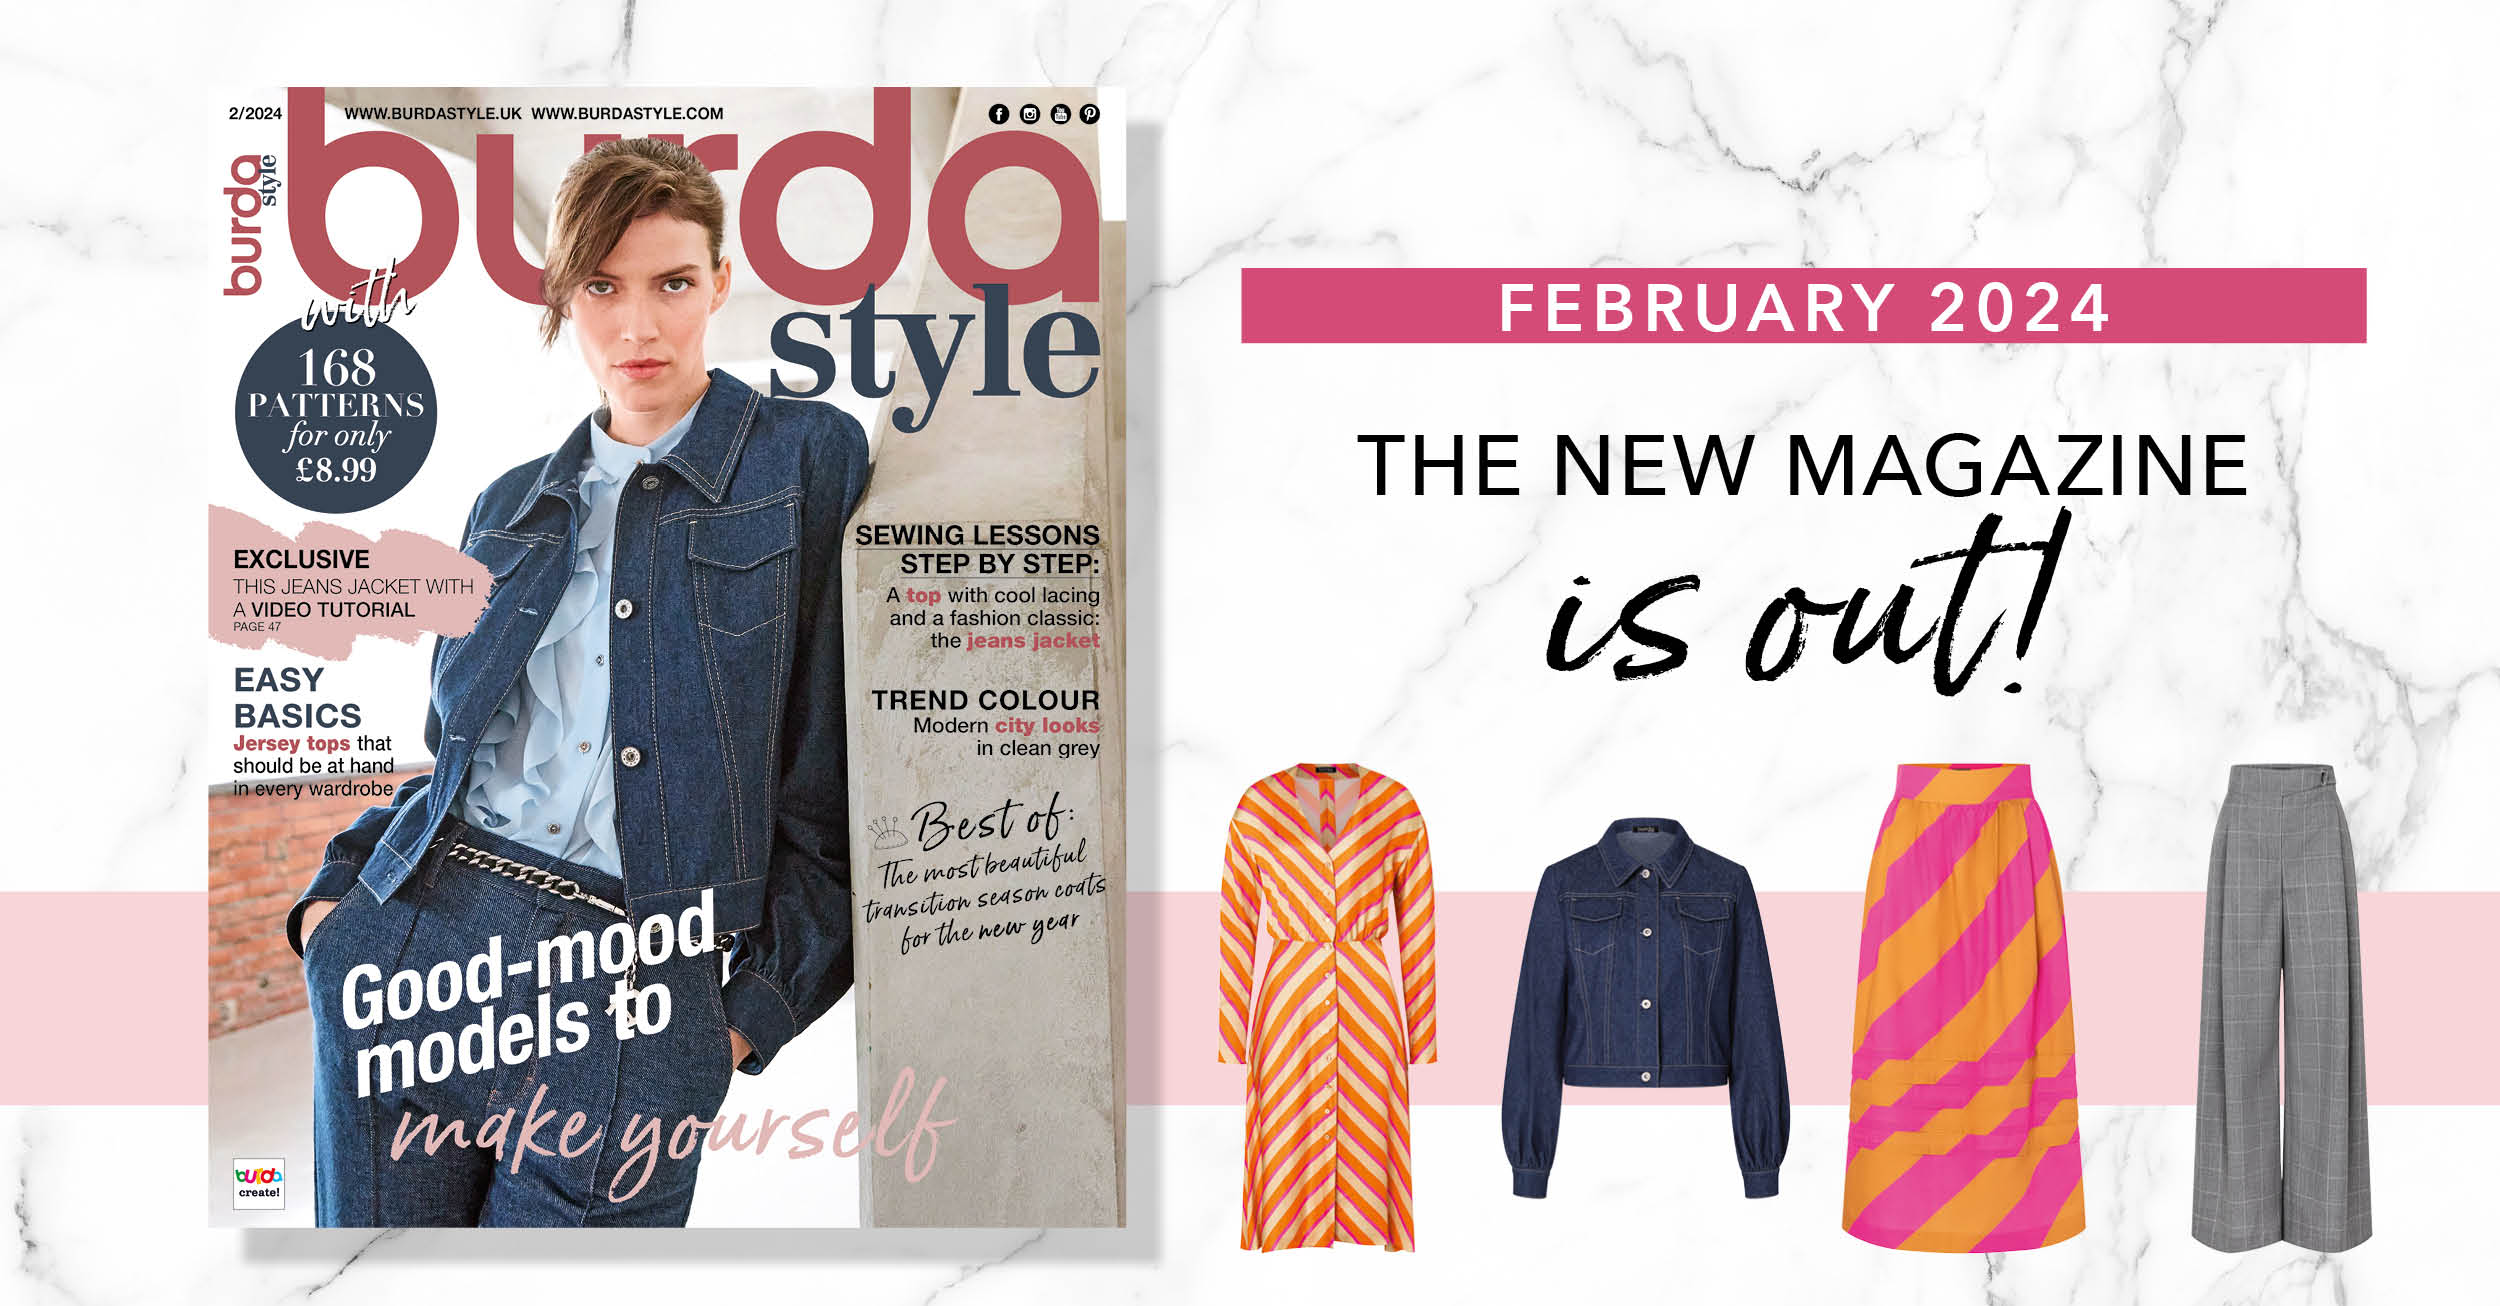 February 2024: The New Issue of Burda Style!